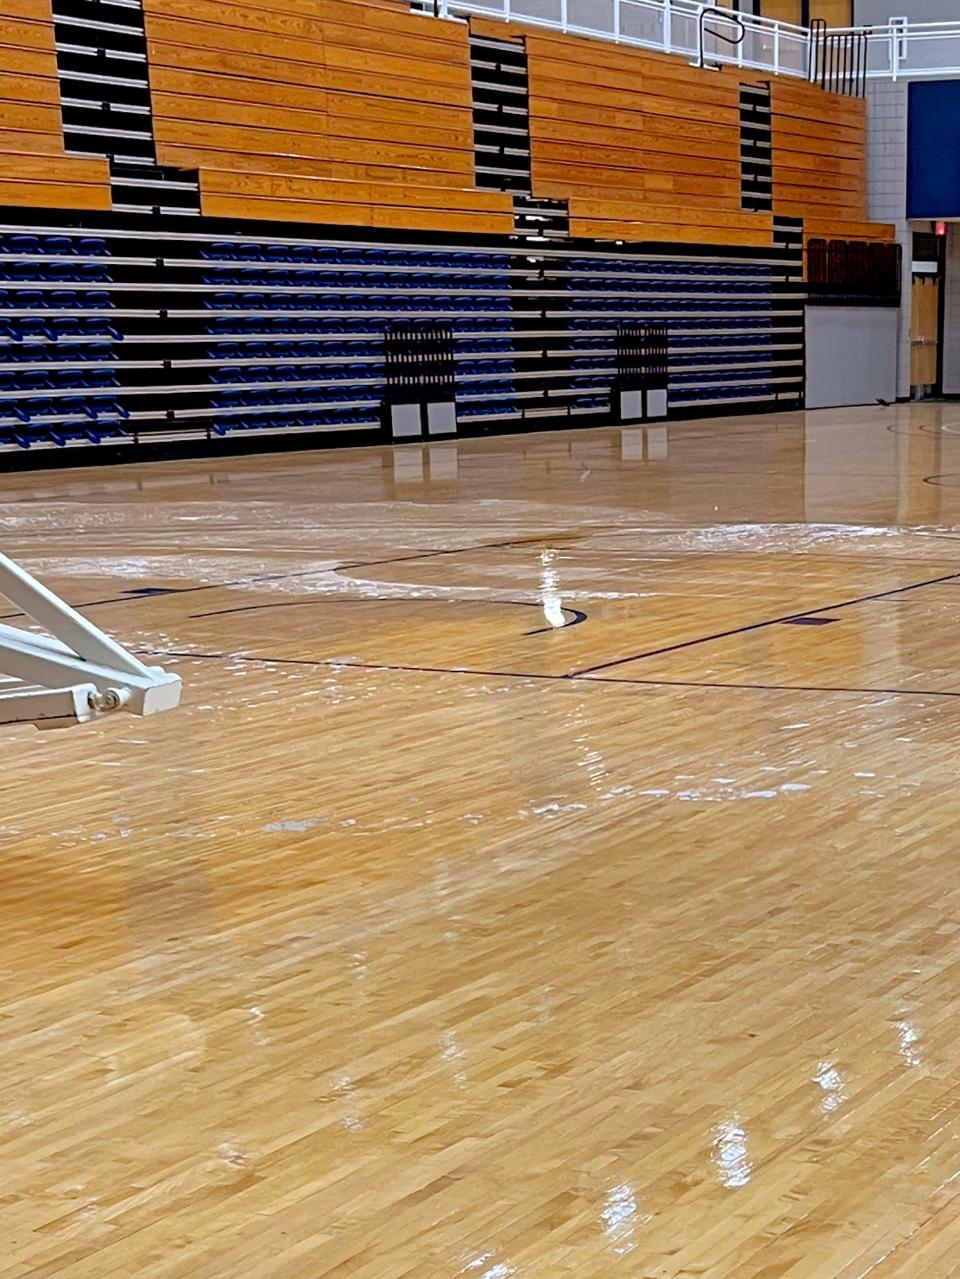 Water damage to the Oklahoma City University basketball court was caused by busted water pipes.